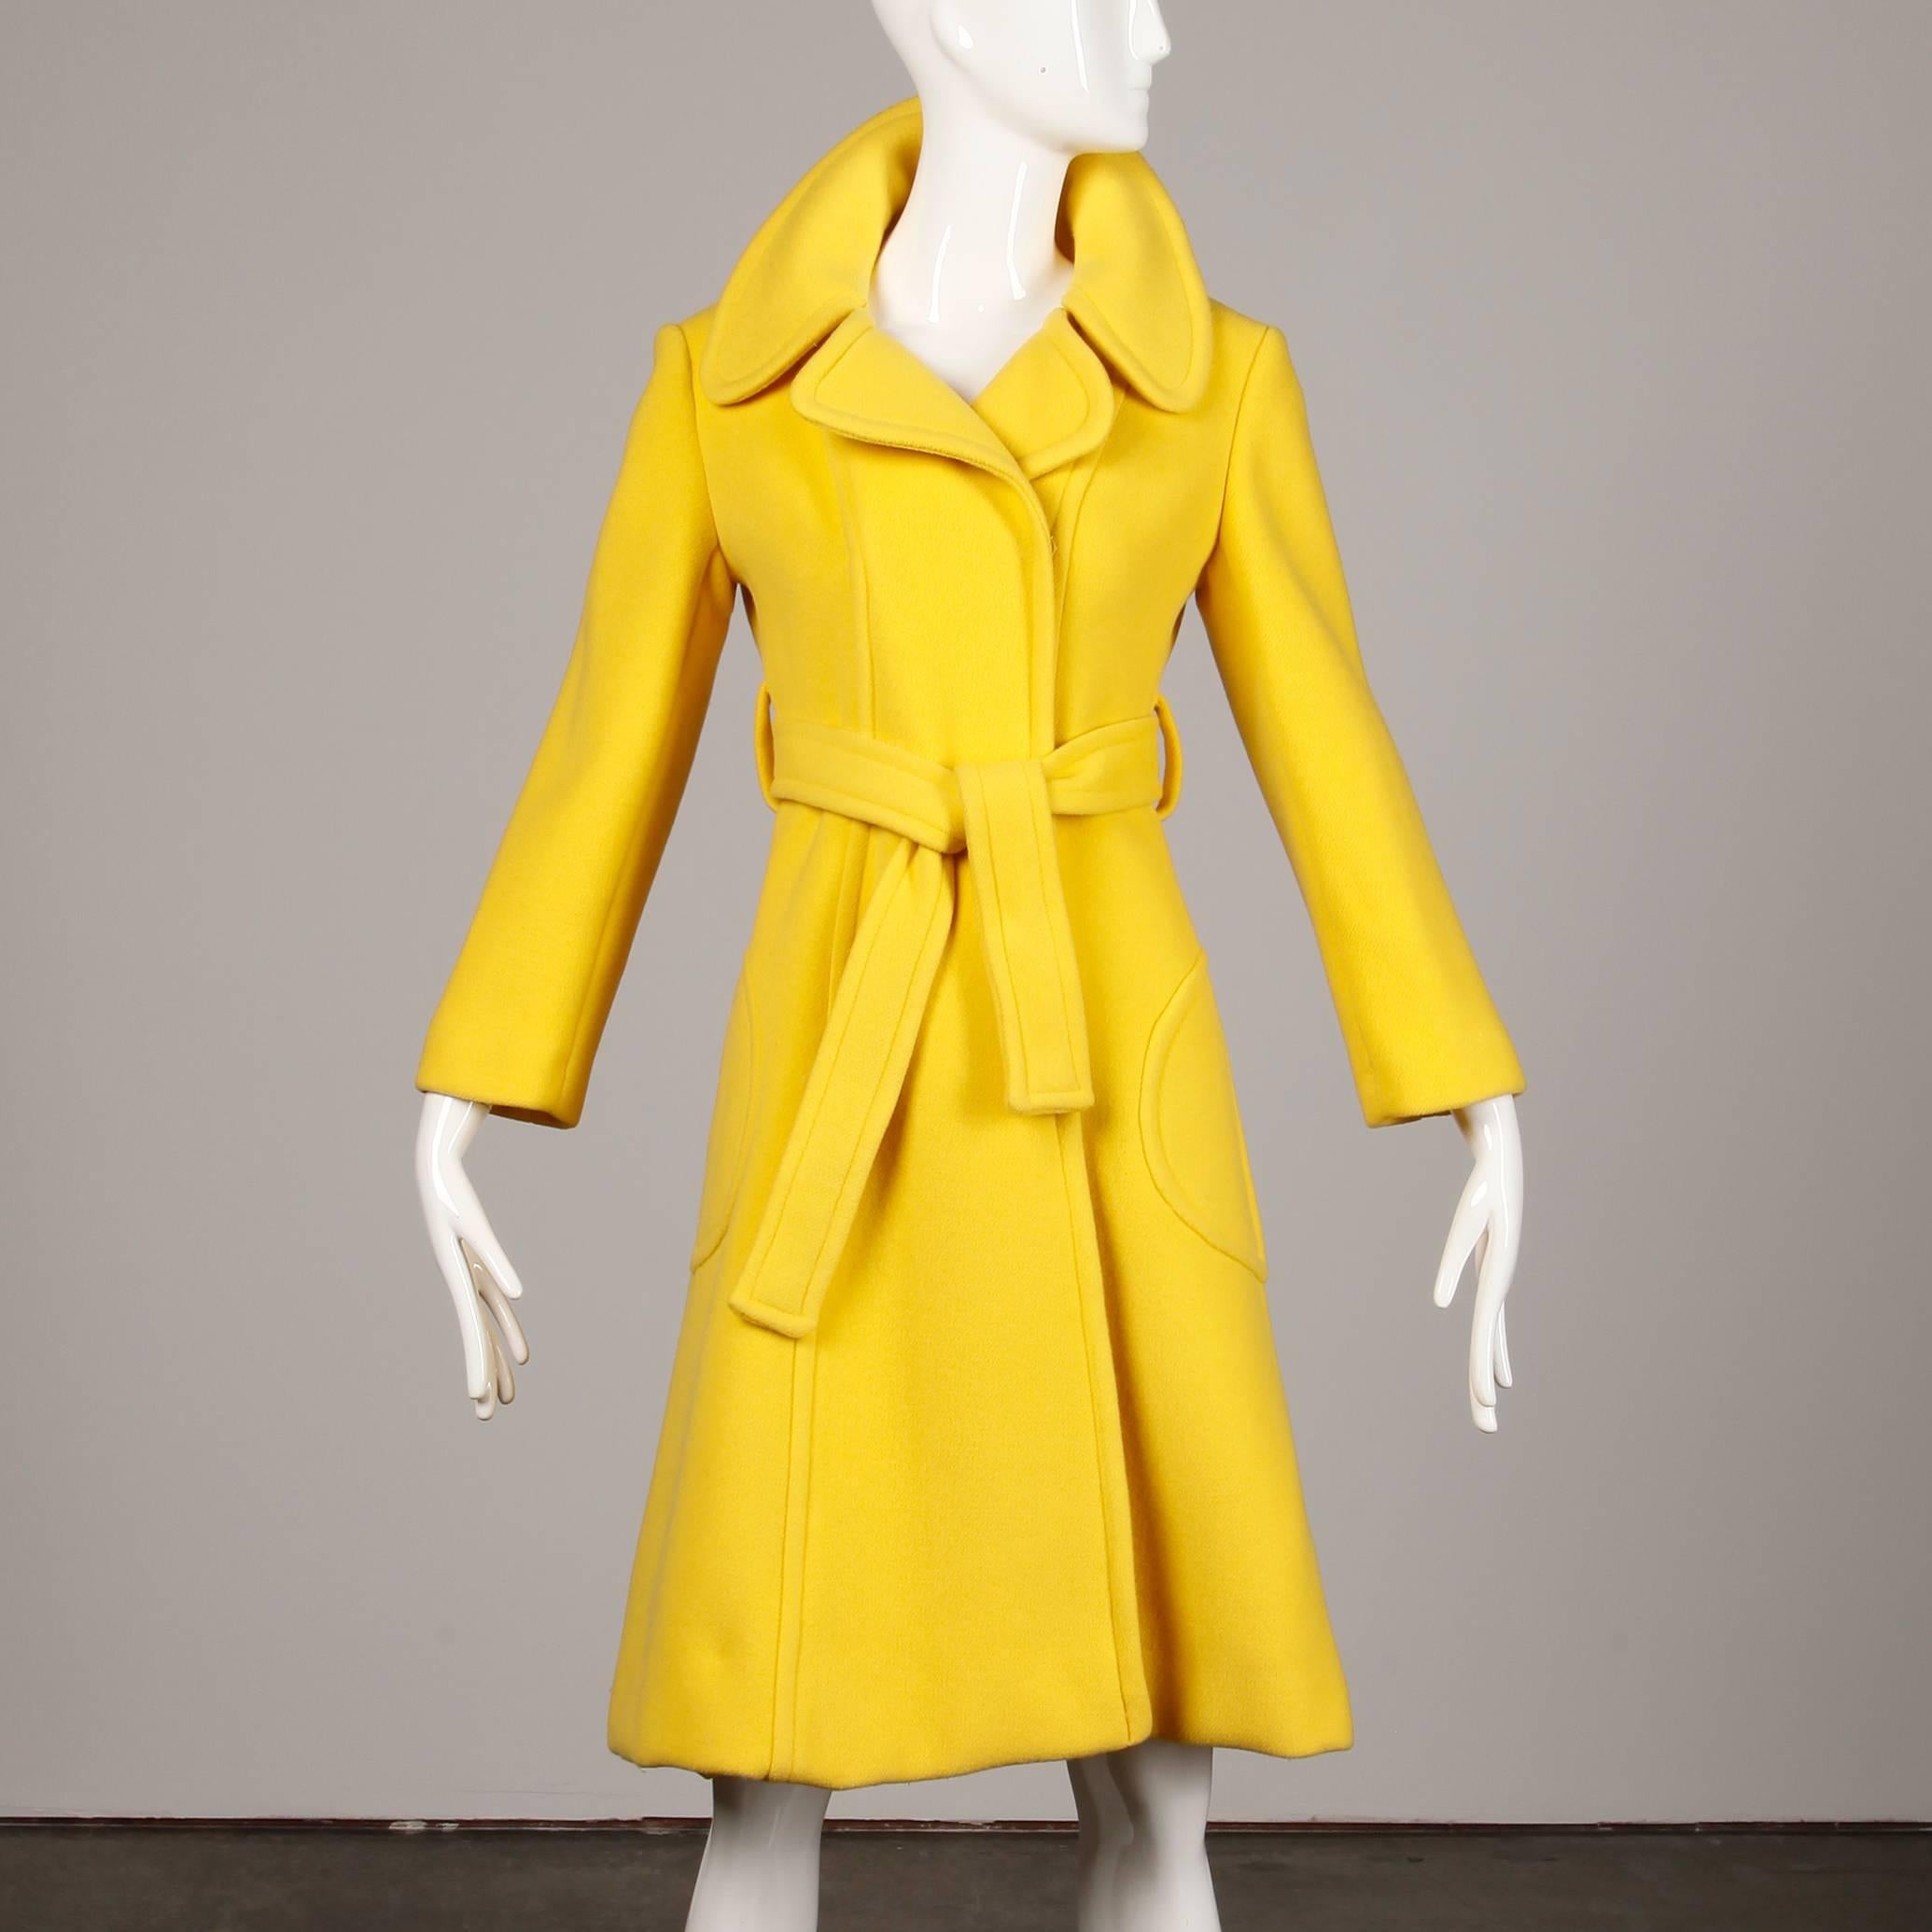 Stunning vintage 1970s yellow wool coat by Dia Diodato with a matching waist sash and rounded pop up collar. Fully lined with front snap and tie closure. Front patch pockets. Fits like a modern size small. The bust measures 35.5